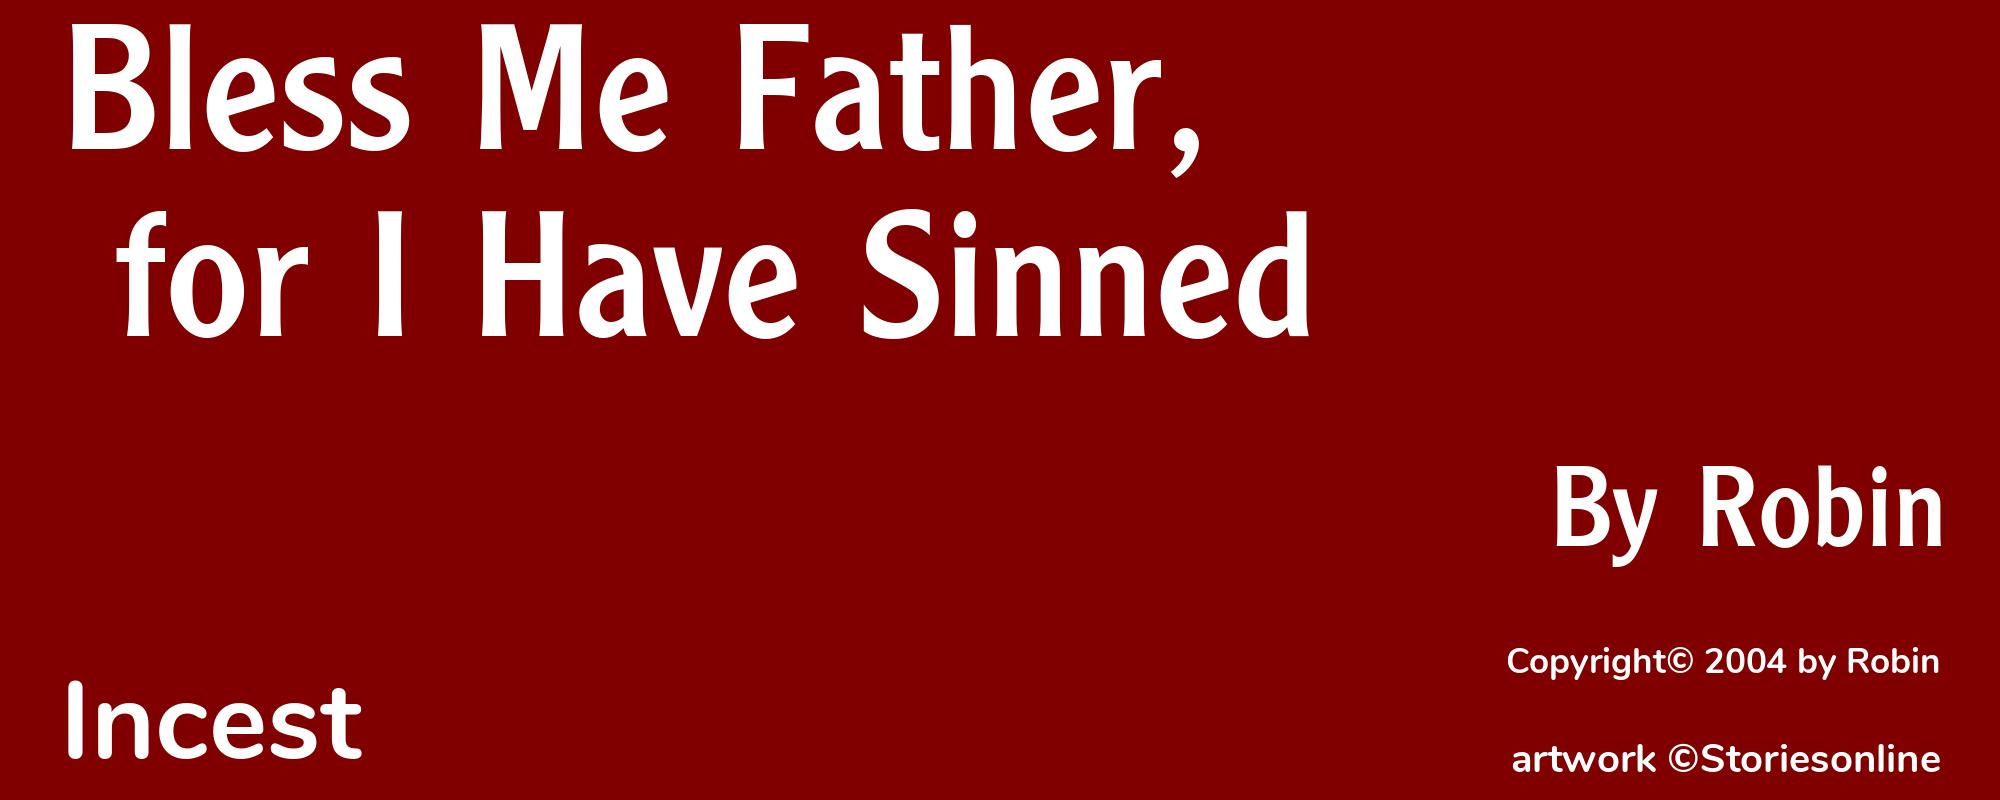 Bless Me Father, for I Have Sinned - Cover